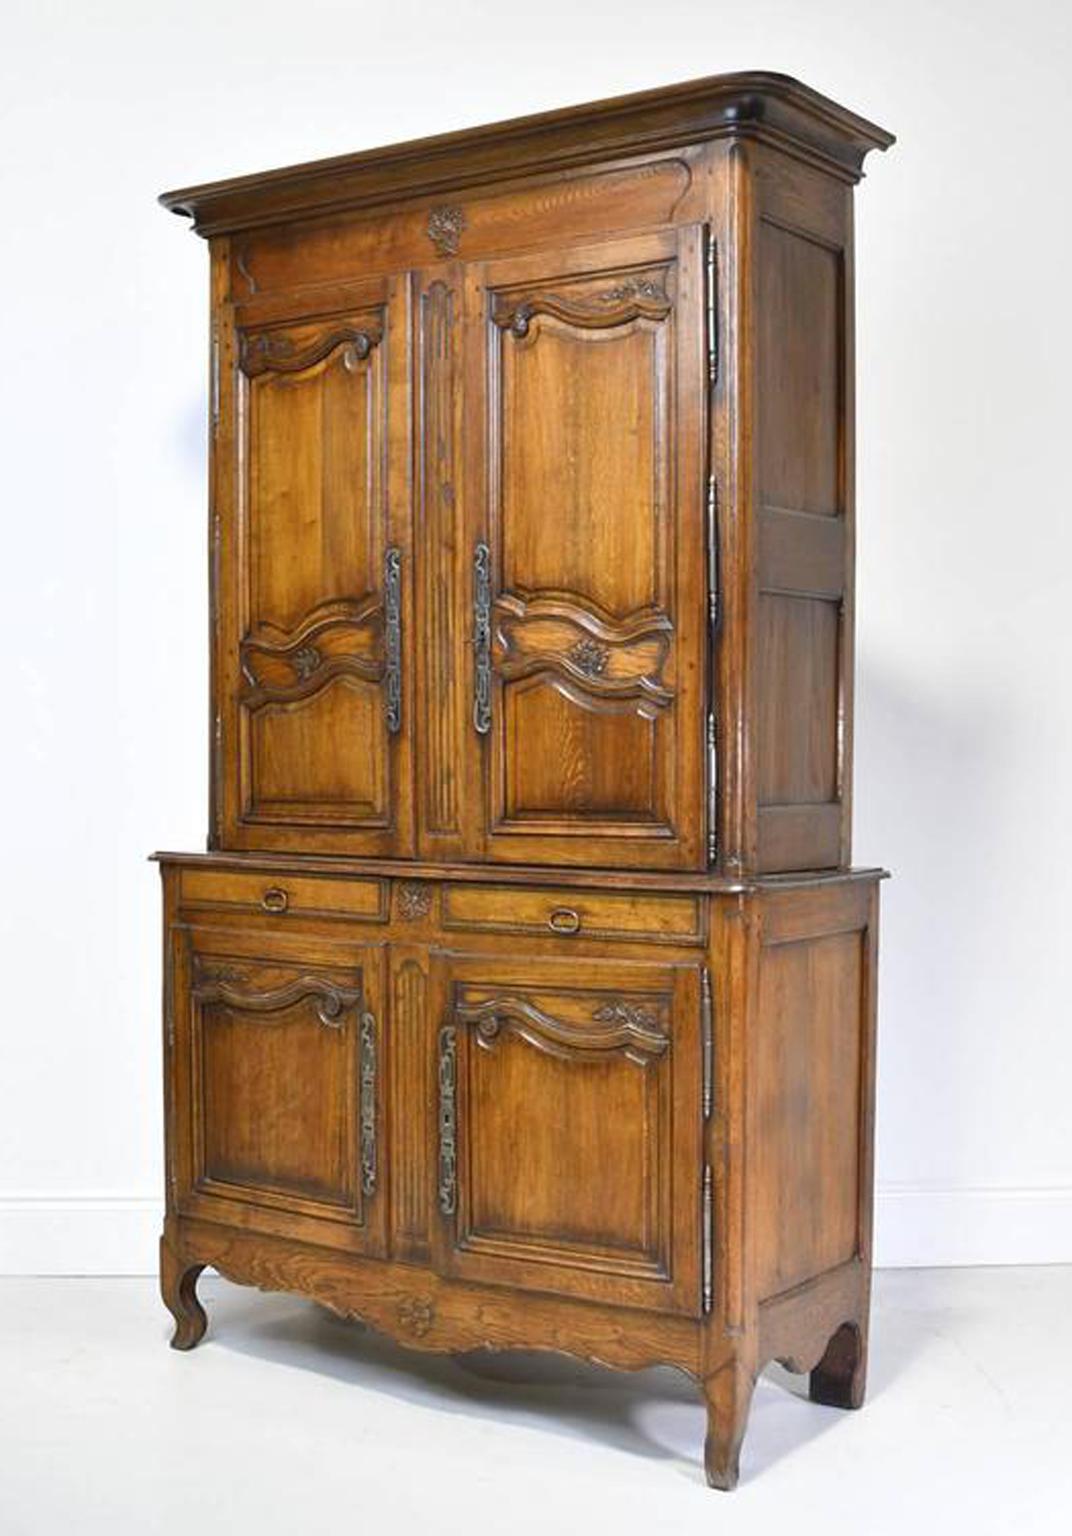 Consolidation of 3 orders to facilitate check out
18th Century Tall French Buffet a Deux Corps in Oak with Hand-Carved Panels LU98817844453 offer $8950
18th Century Period Louis XV Cupboard in Walnut with Dish Rack, France, c. 1750 LU98811009882